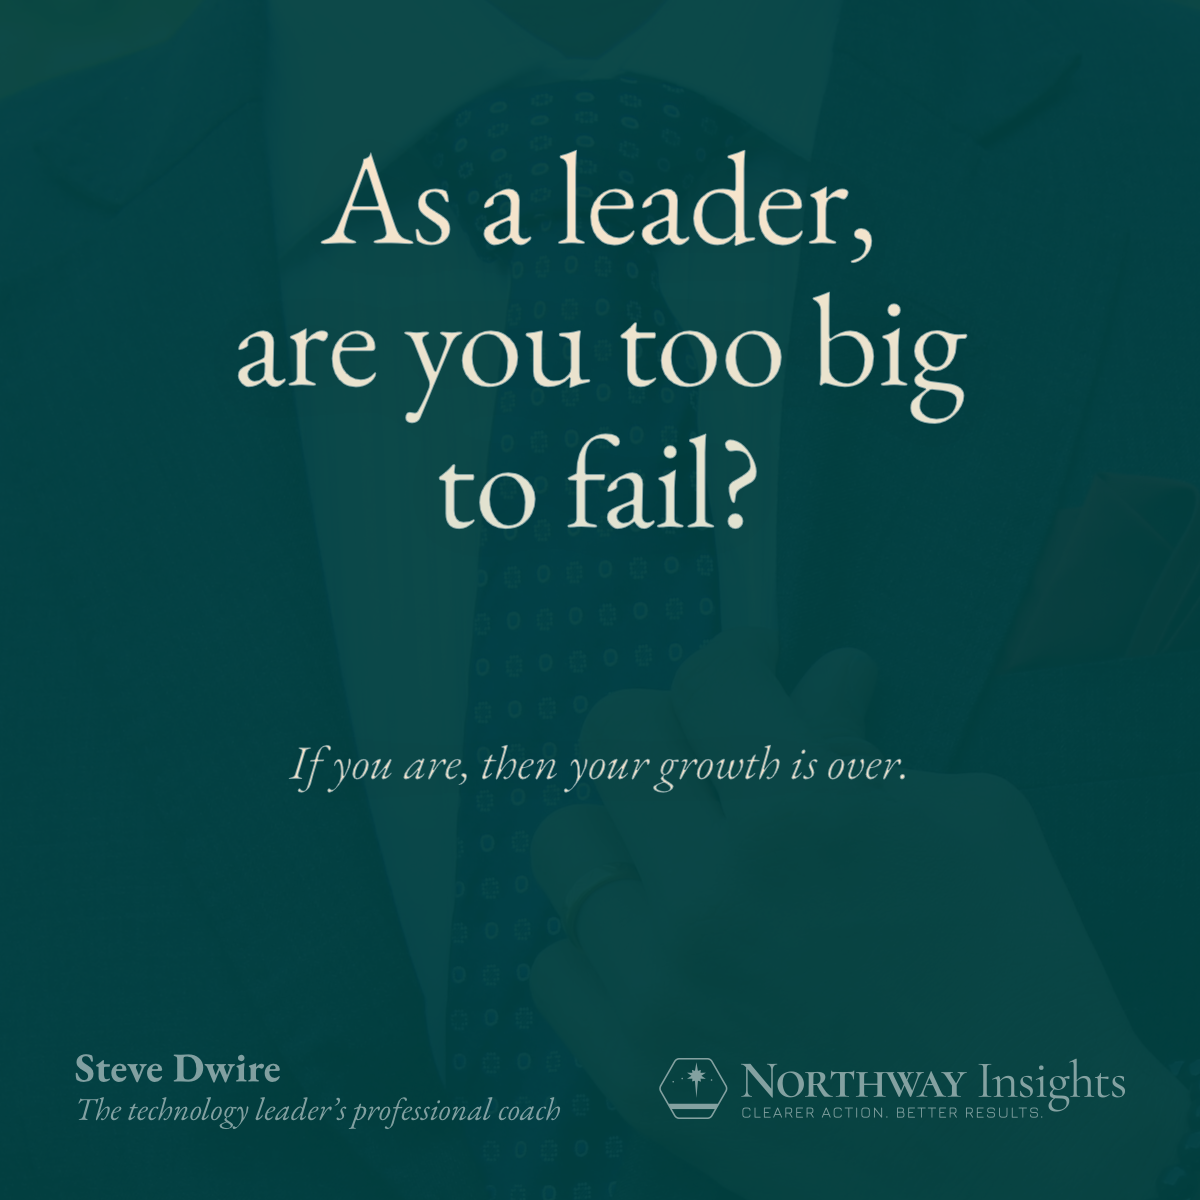 As a leader, are you too big to fail? (If you are, then your growth is over.)